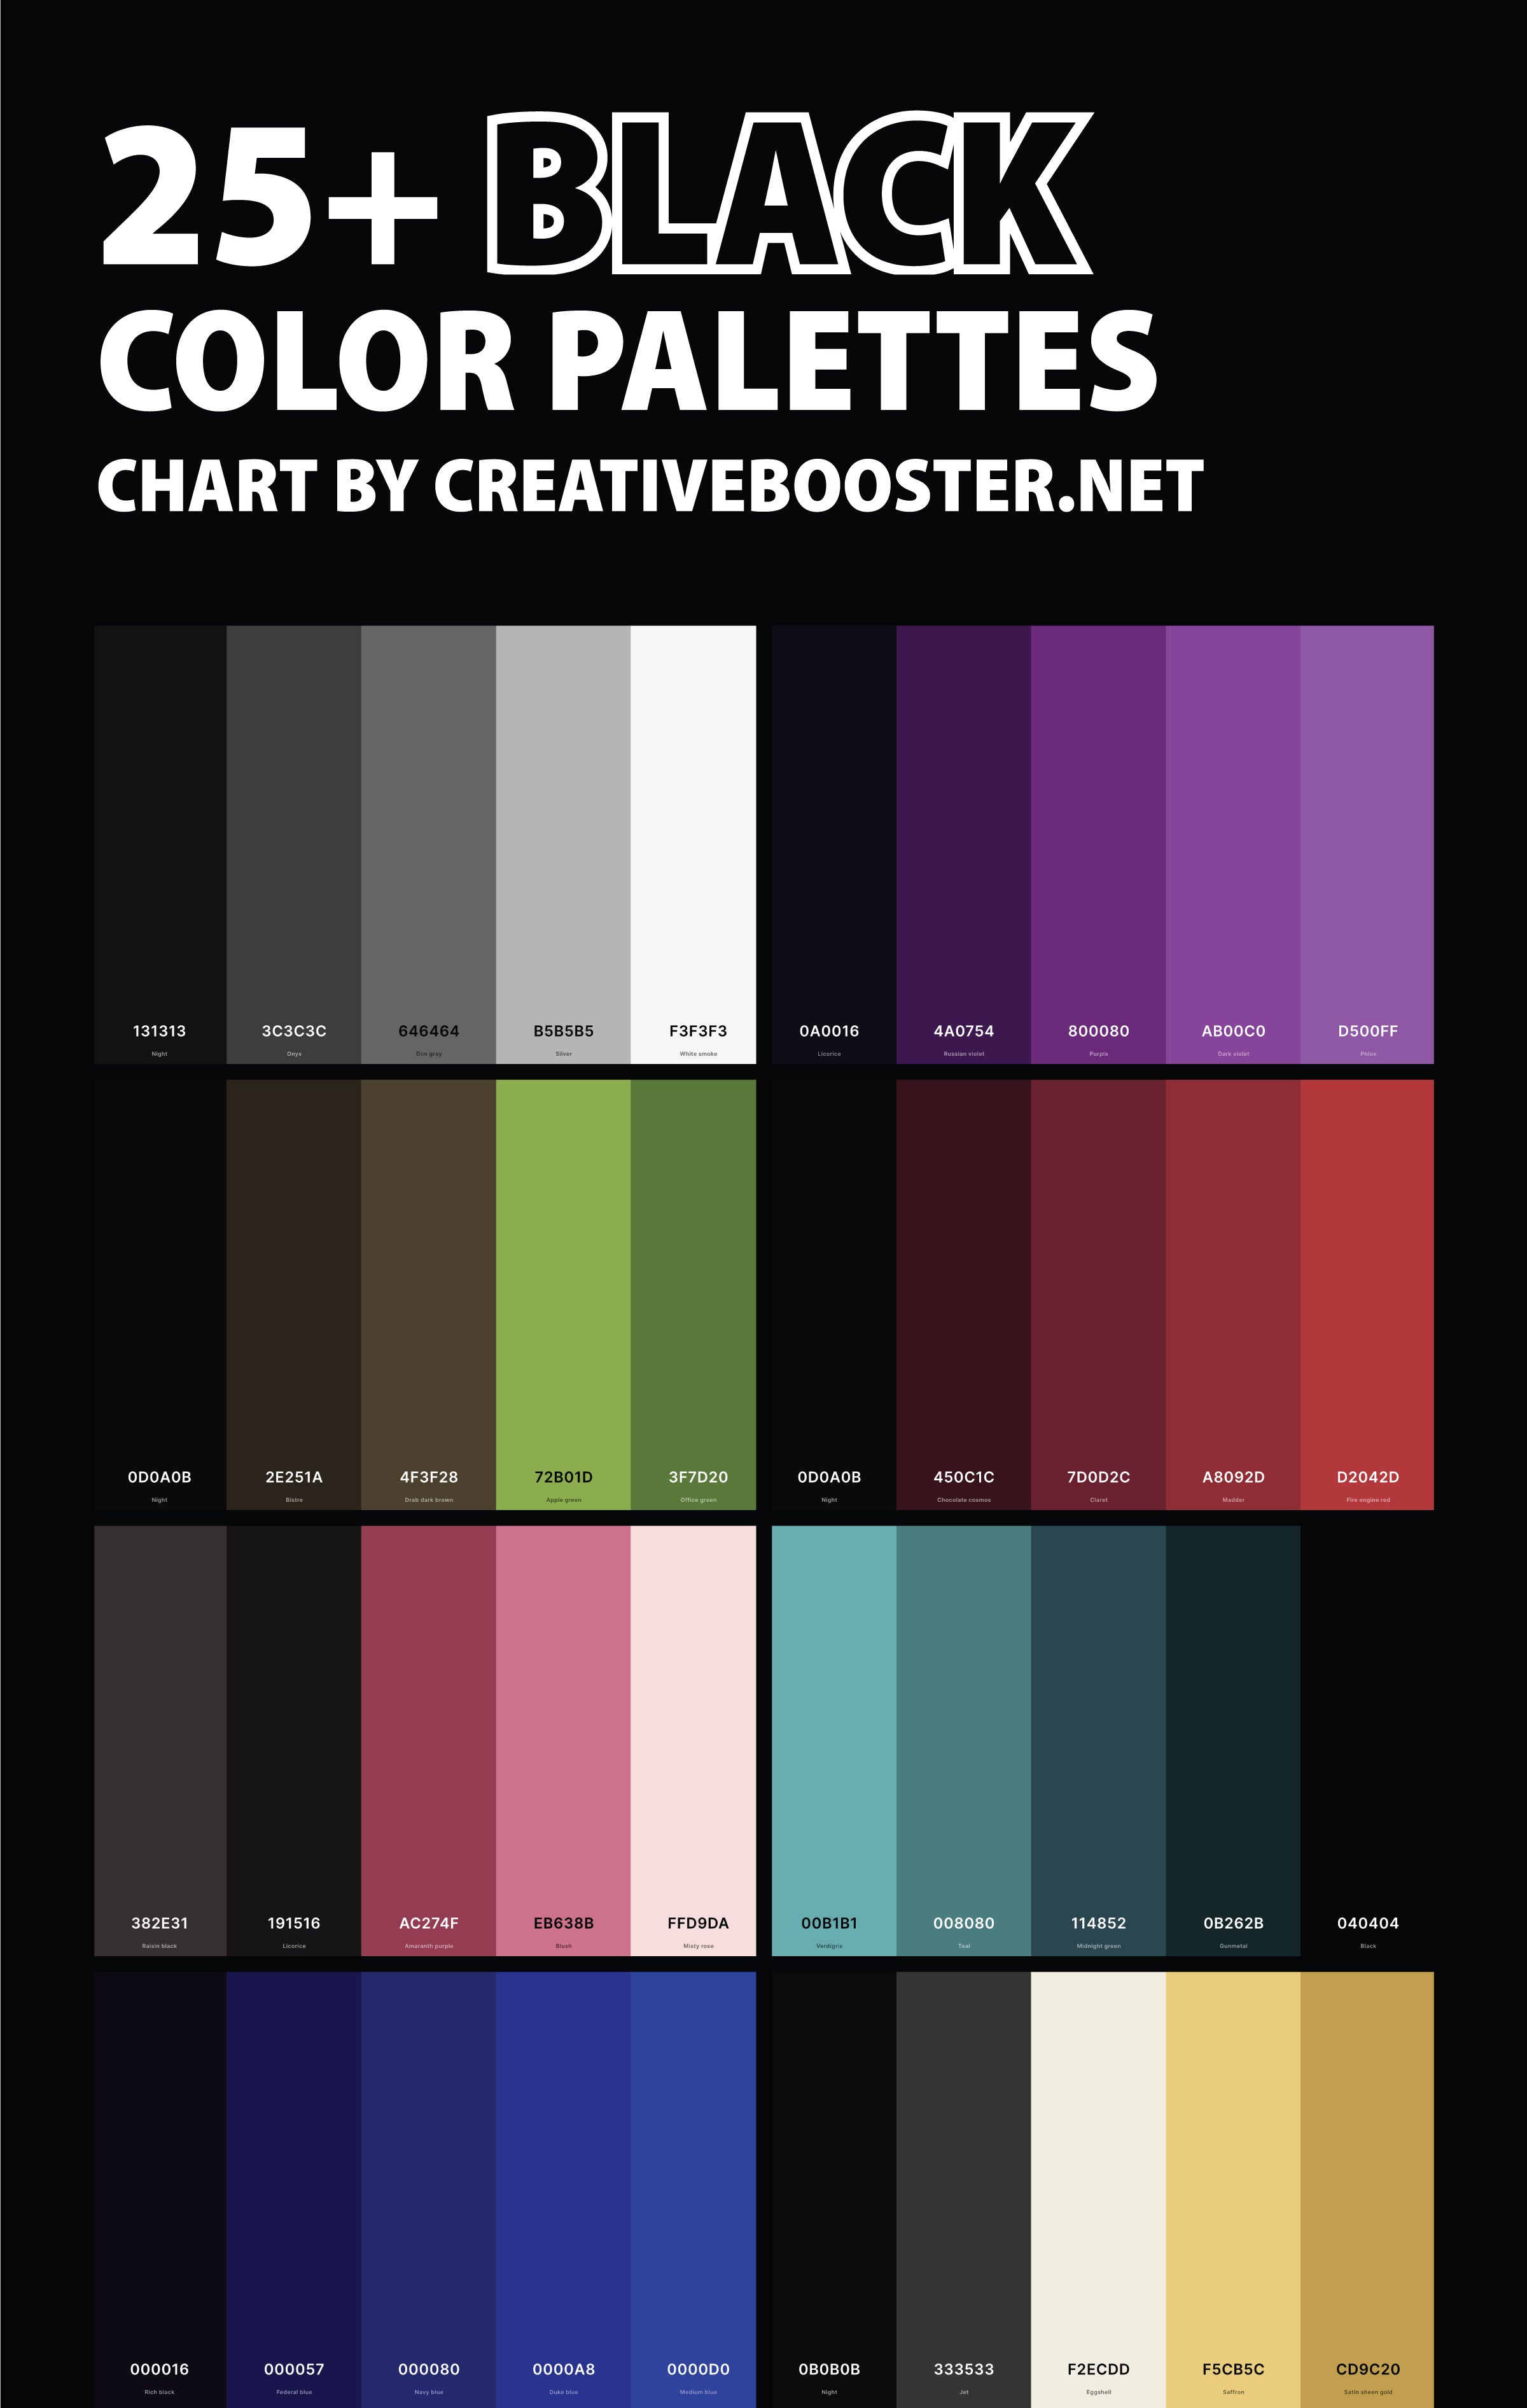 black-color-palettes-chart-with-names-and-hex-codes-pinterest